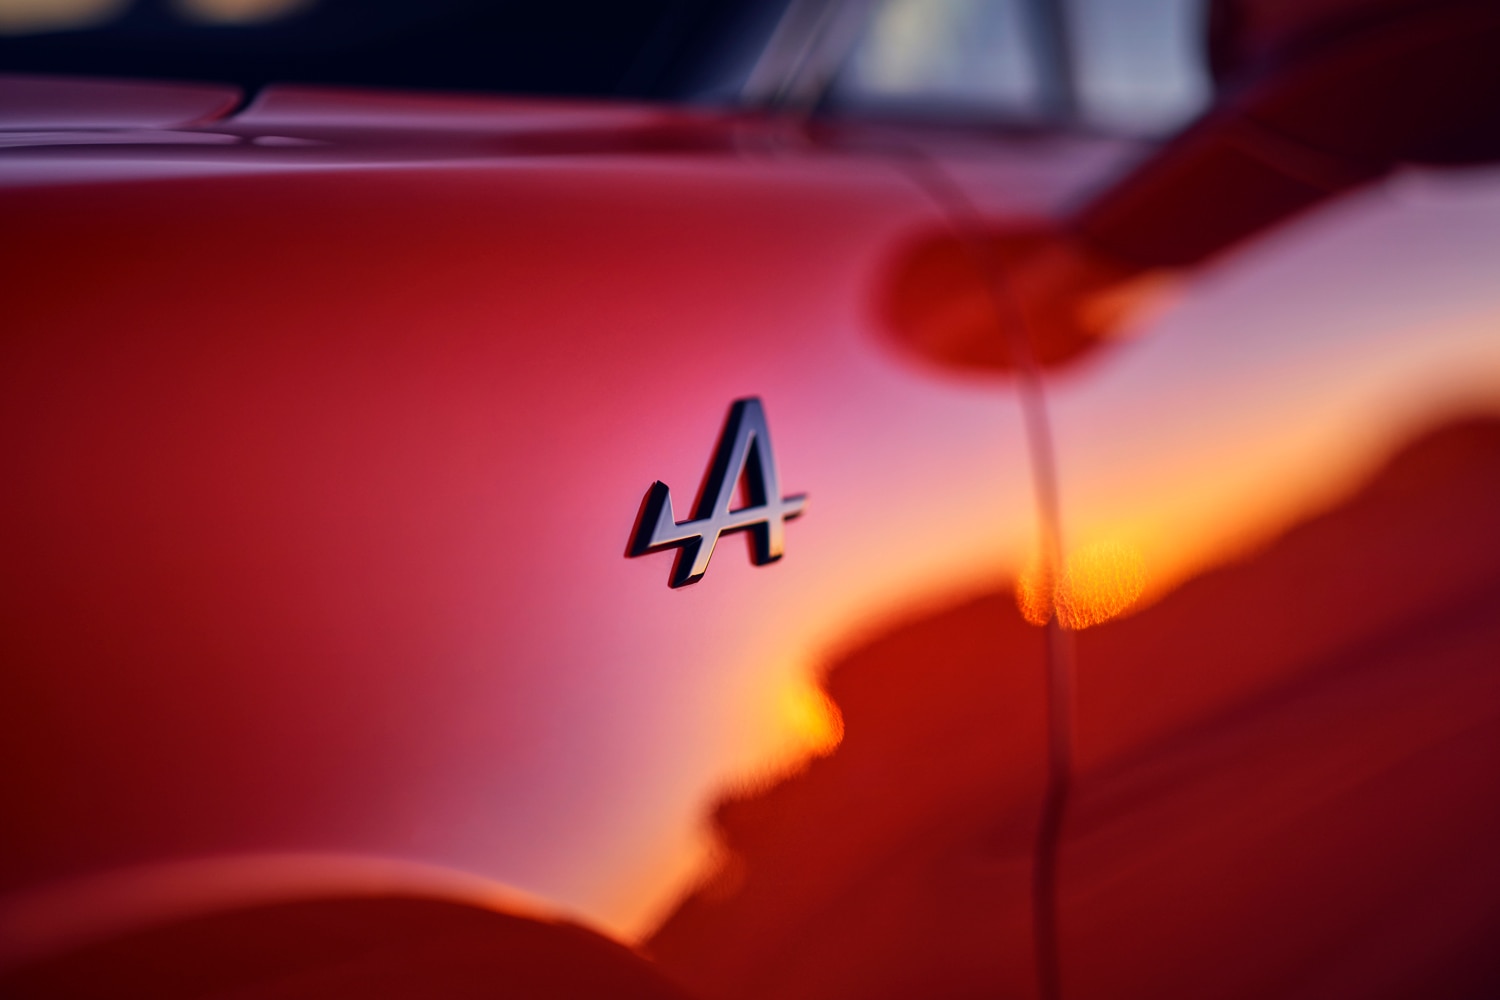 Closeup of the Alpine logo on the side of a red model